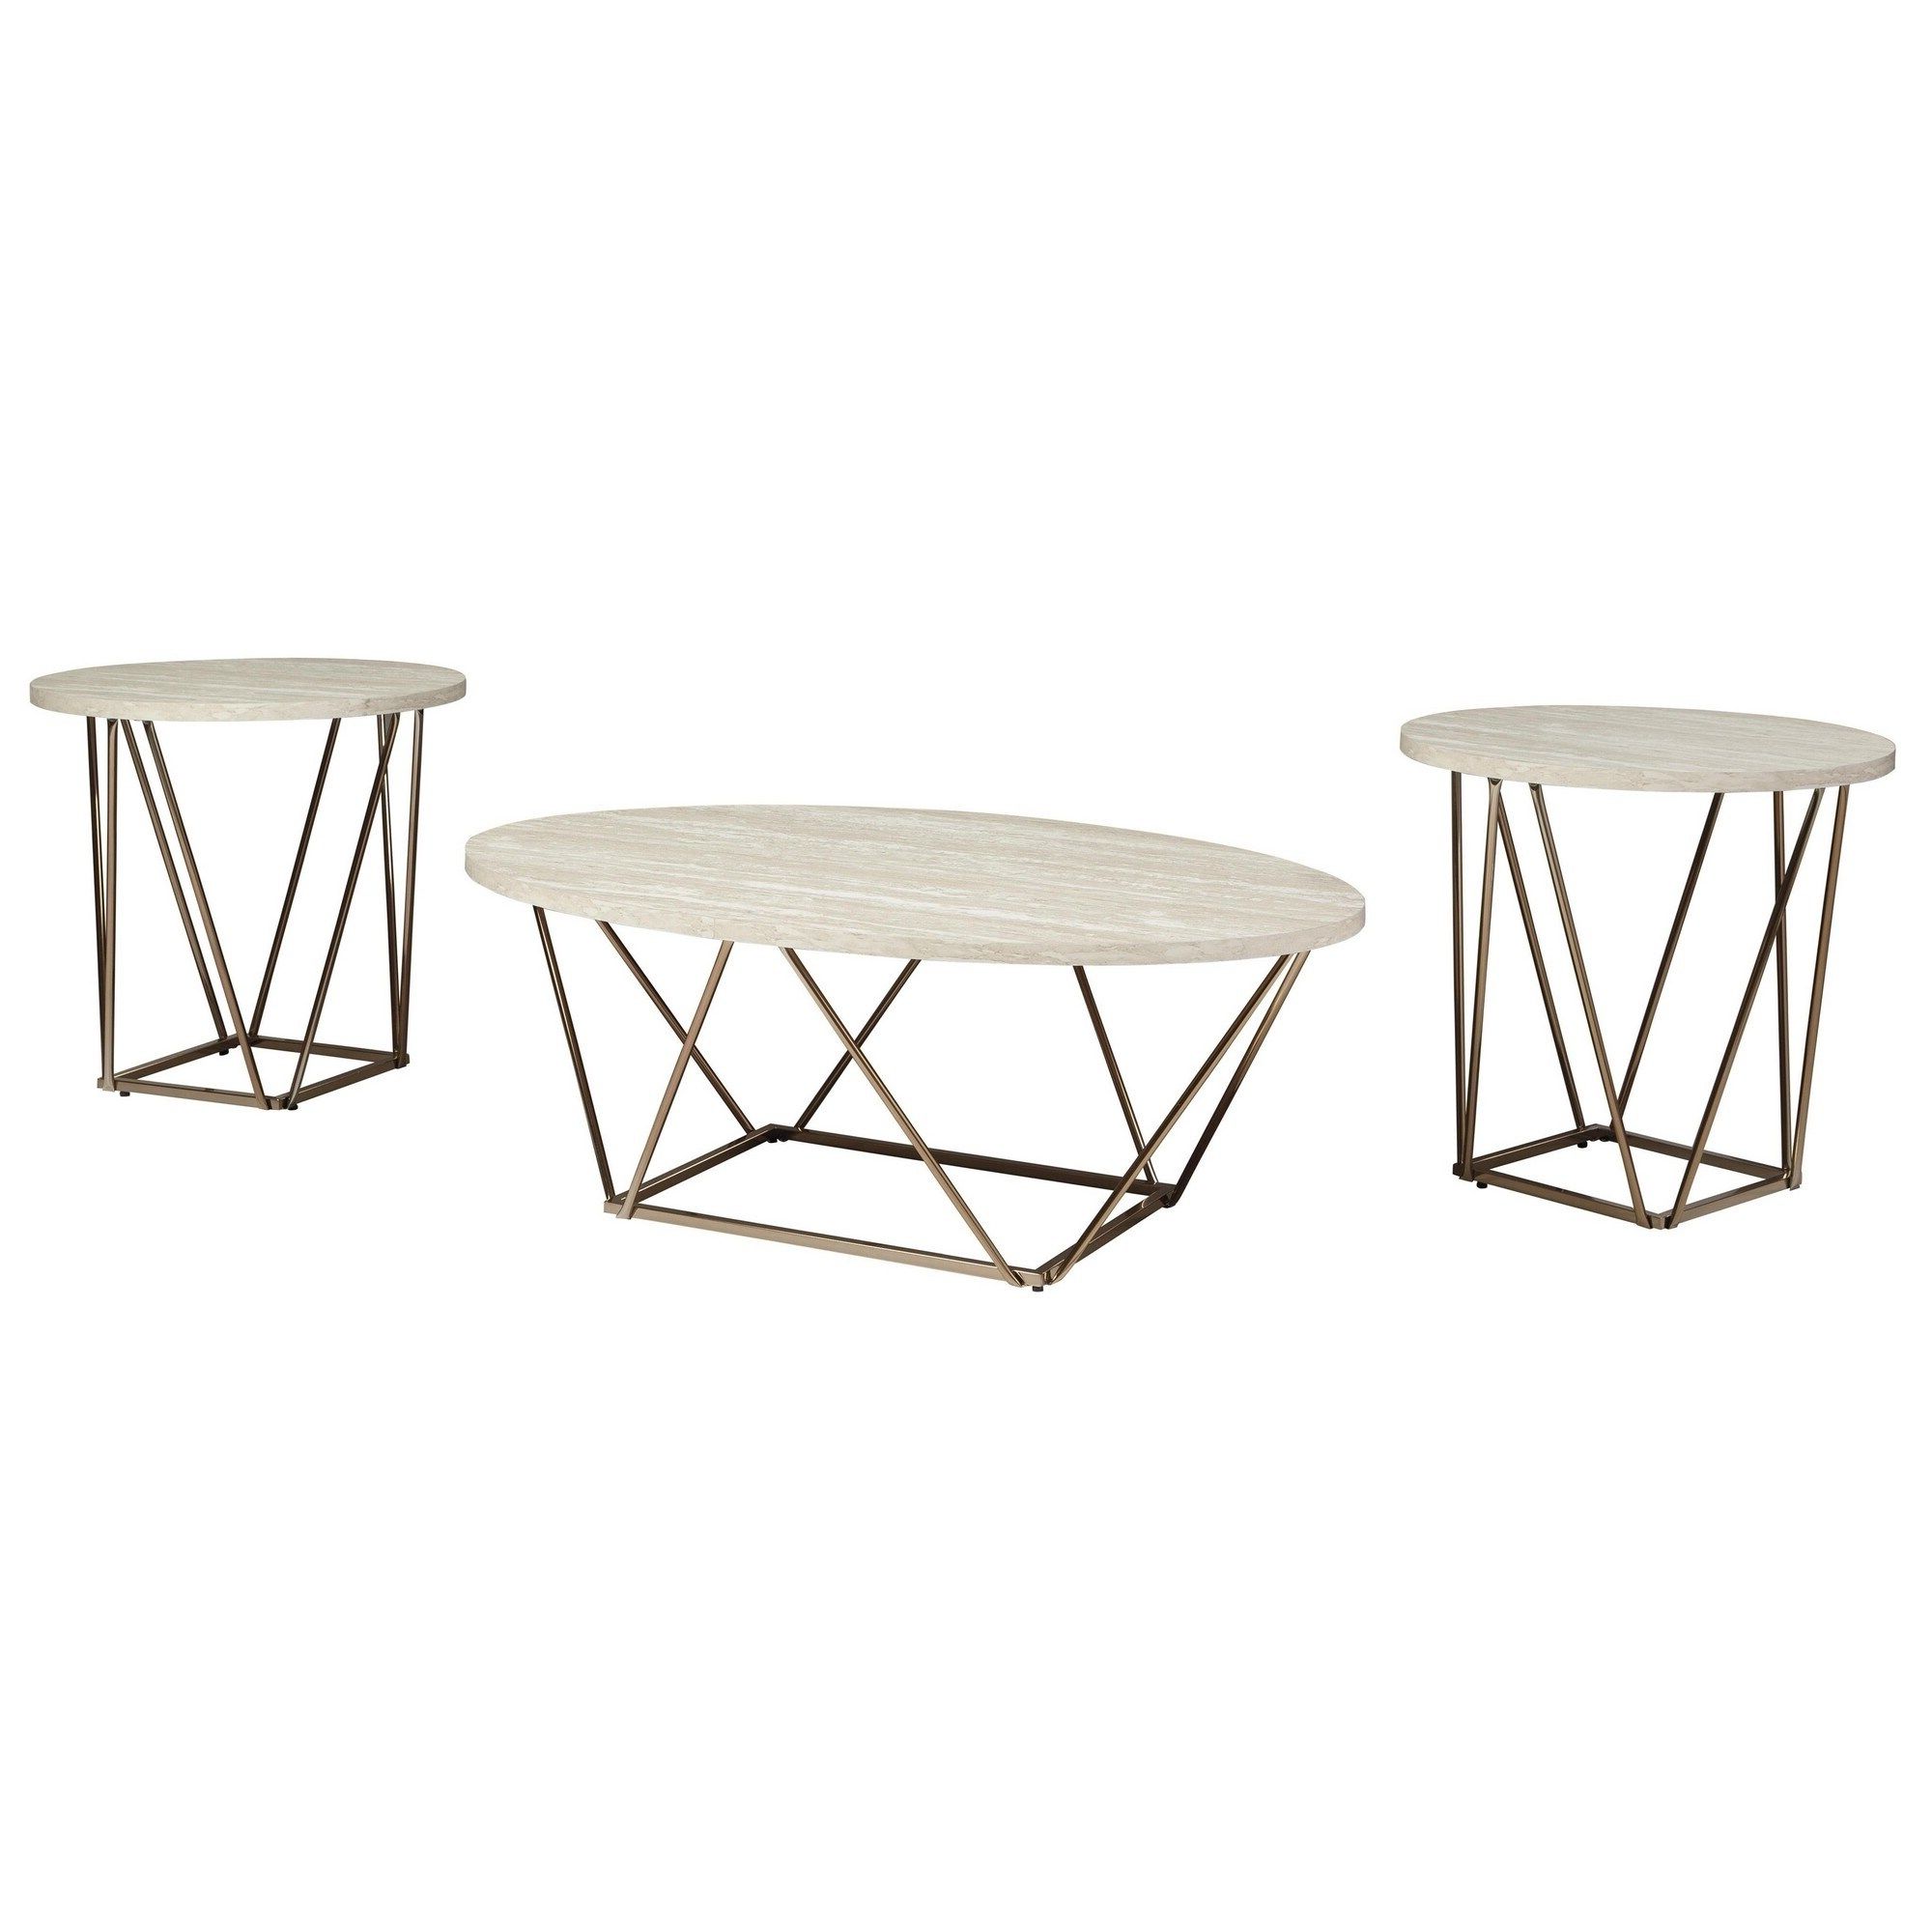 Faux Marble Table Set With 1 Coffee Table And 2 End Tables, White And Gold  – On Sale – Overstock – 30984929 Pertaining To 2019 Faux Marble Gold Outdoor Tables (View 8 of 15)